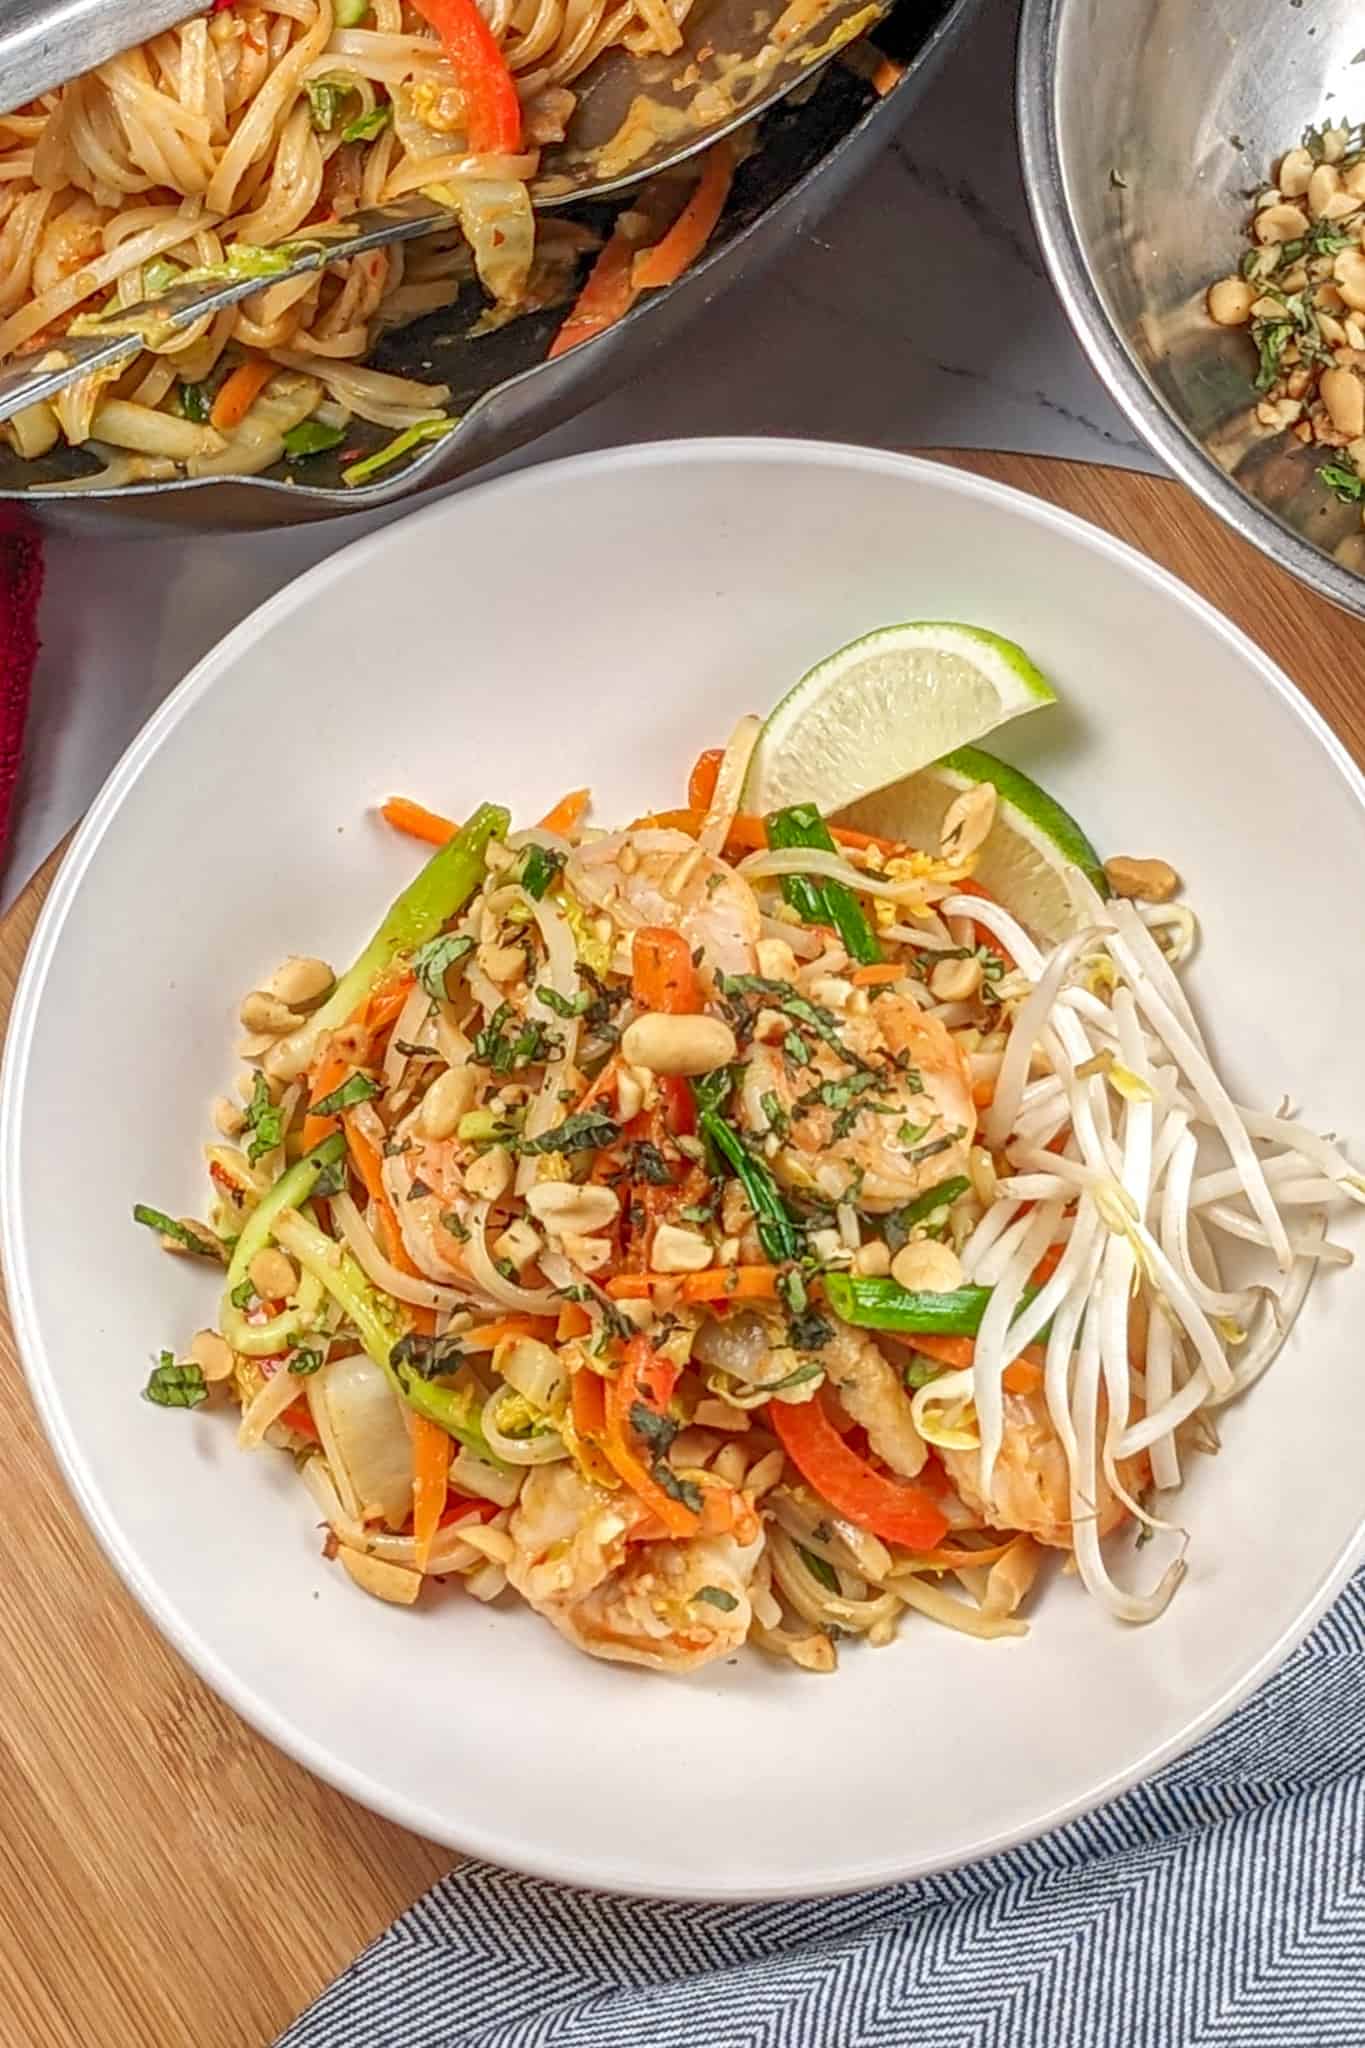 Shrimp and Pork Belly Pad Thai - Spring Roll Style in a wide rim bowl on a wooden lazy susan next to a kitchen towel, a wok with the rest of the noodles and a bowl of toasted peanuts tossed in herbs.